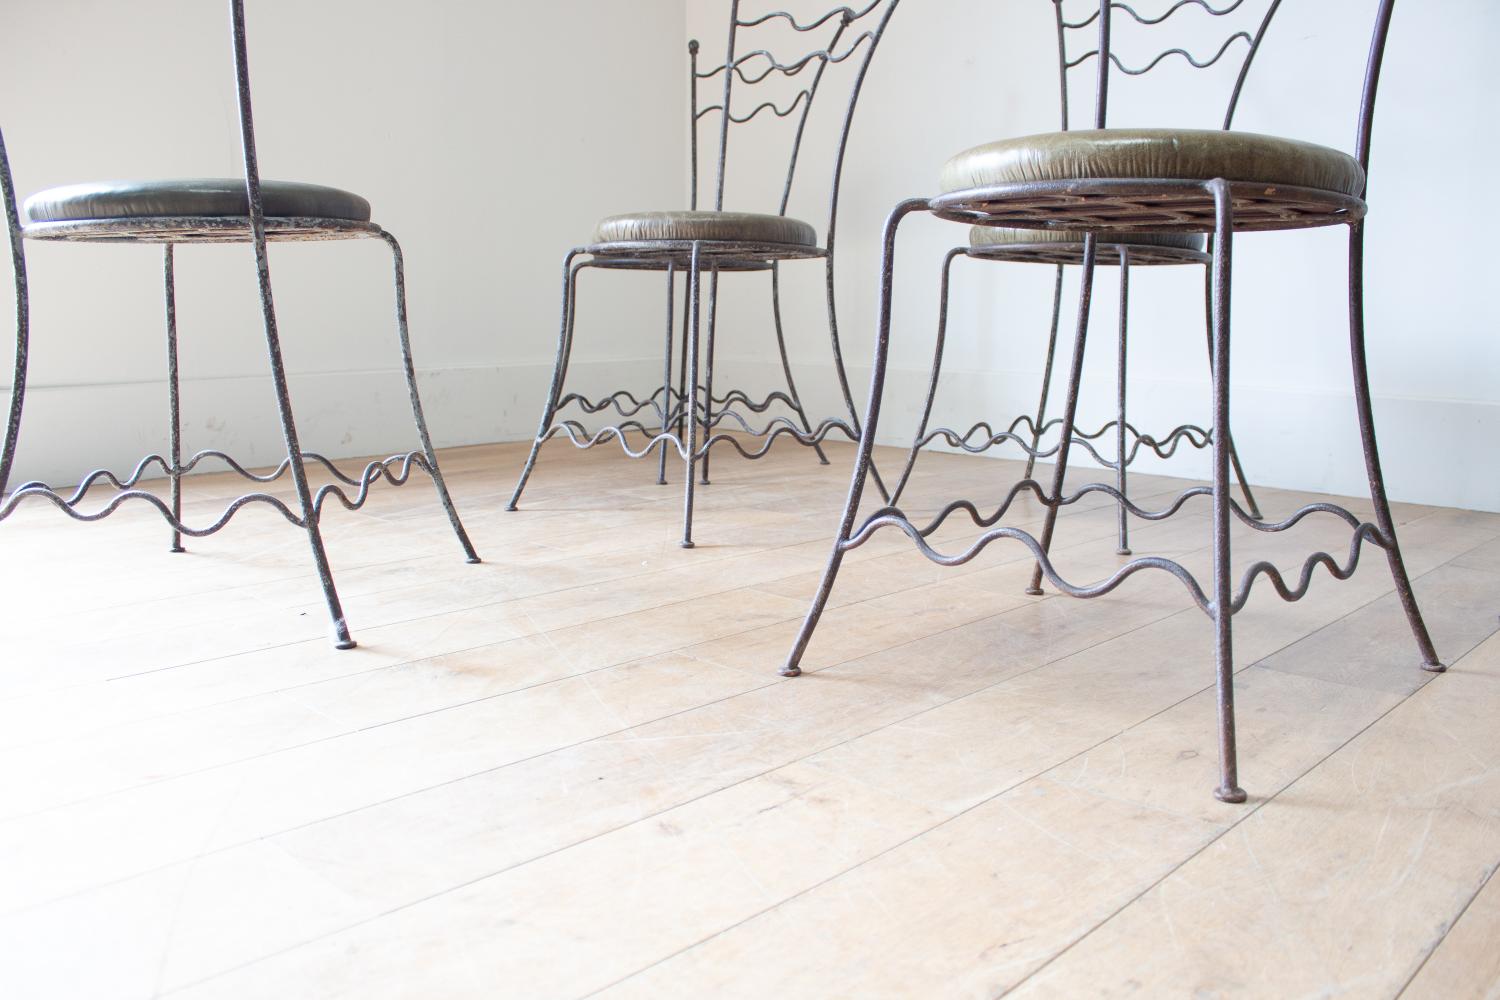 A set of 6 wrought iron chairs in Seating